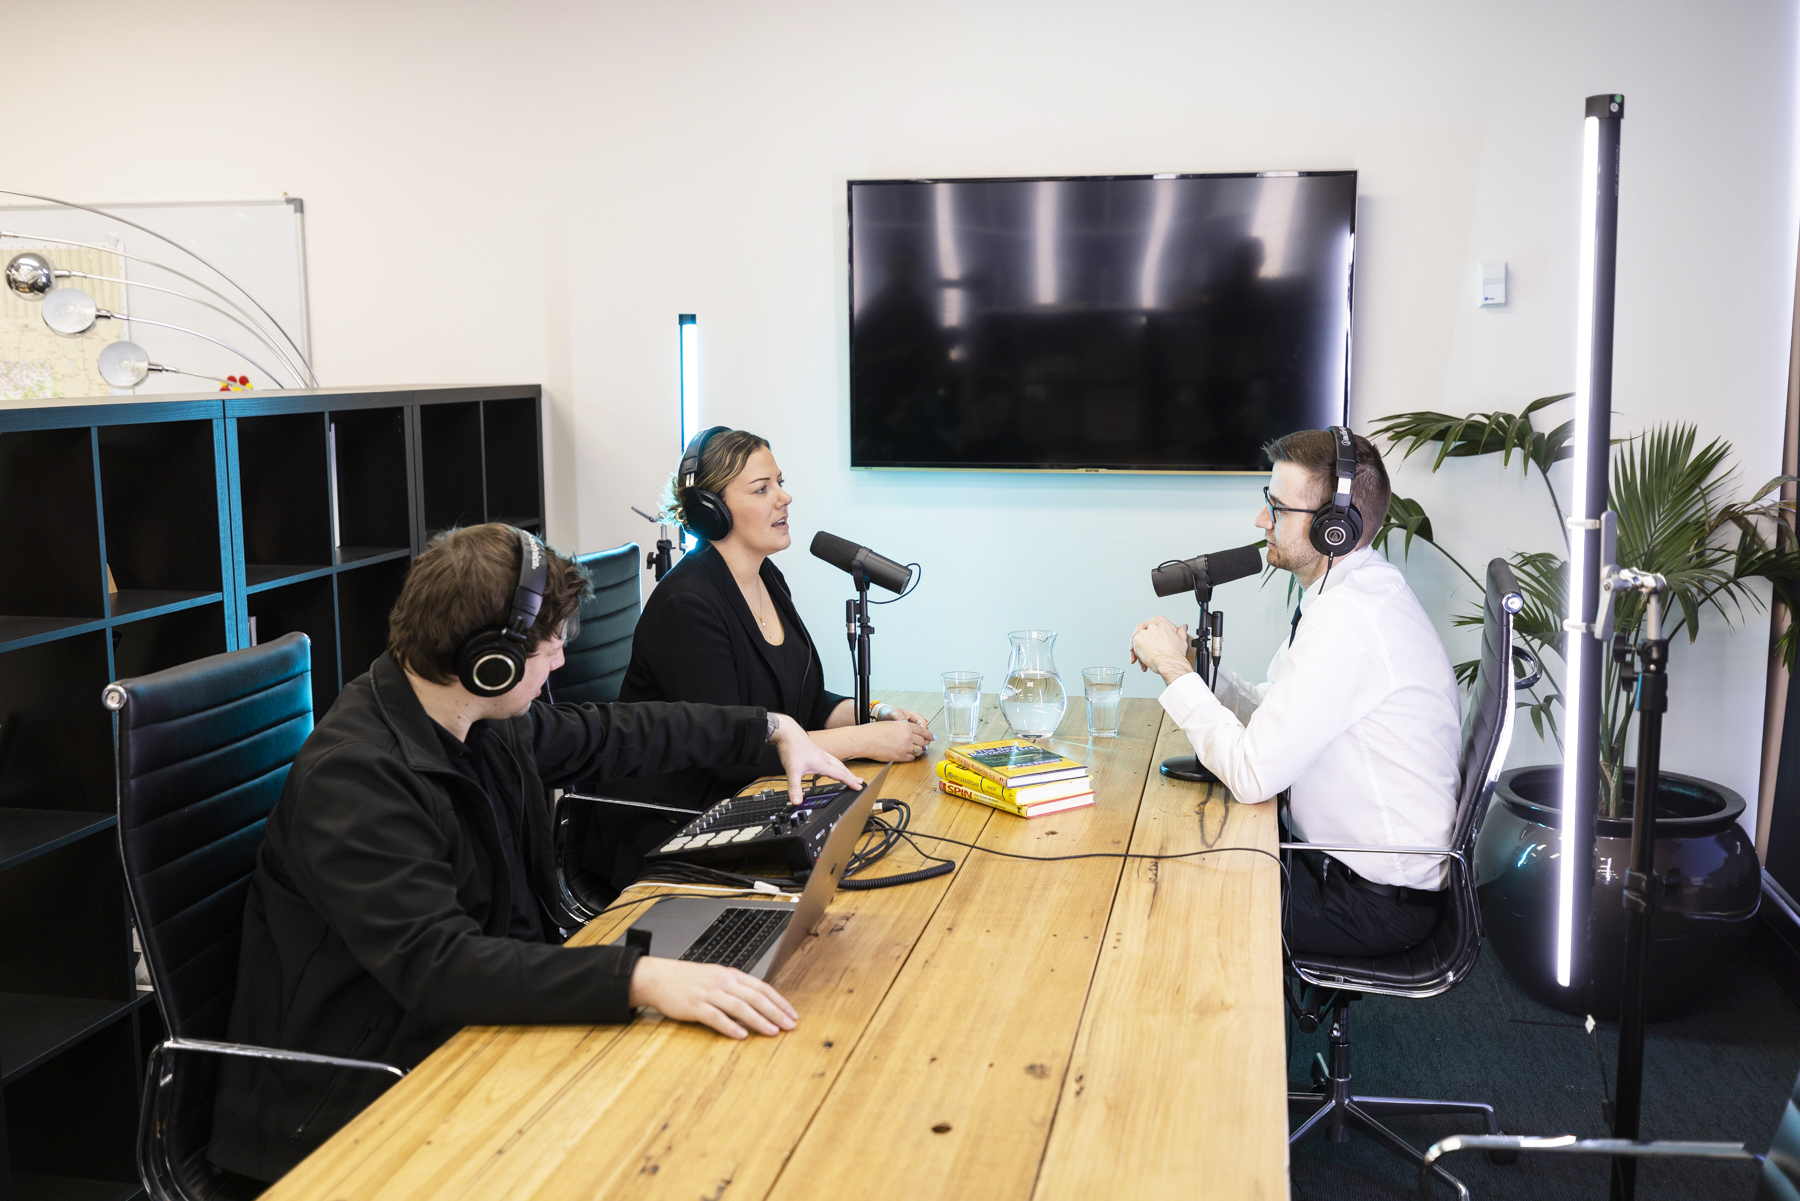 3 people sitting around a table recording a podcast, 2 are talking into microphones with headsets on